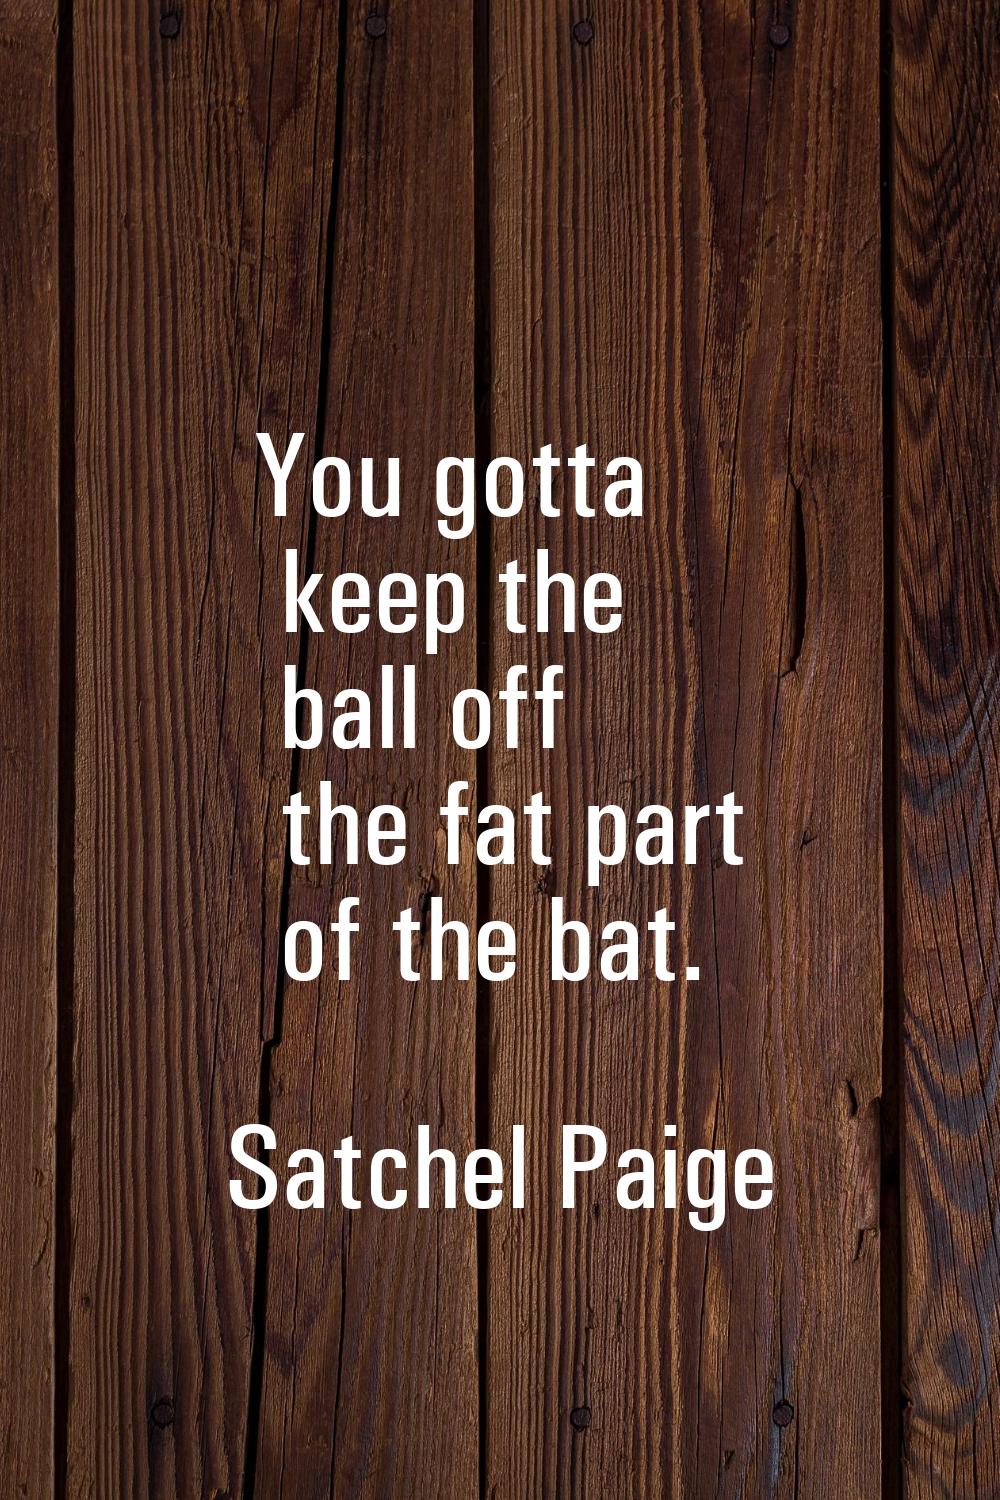 You gotta keep the ball off the fat part of the bat.